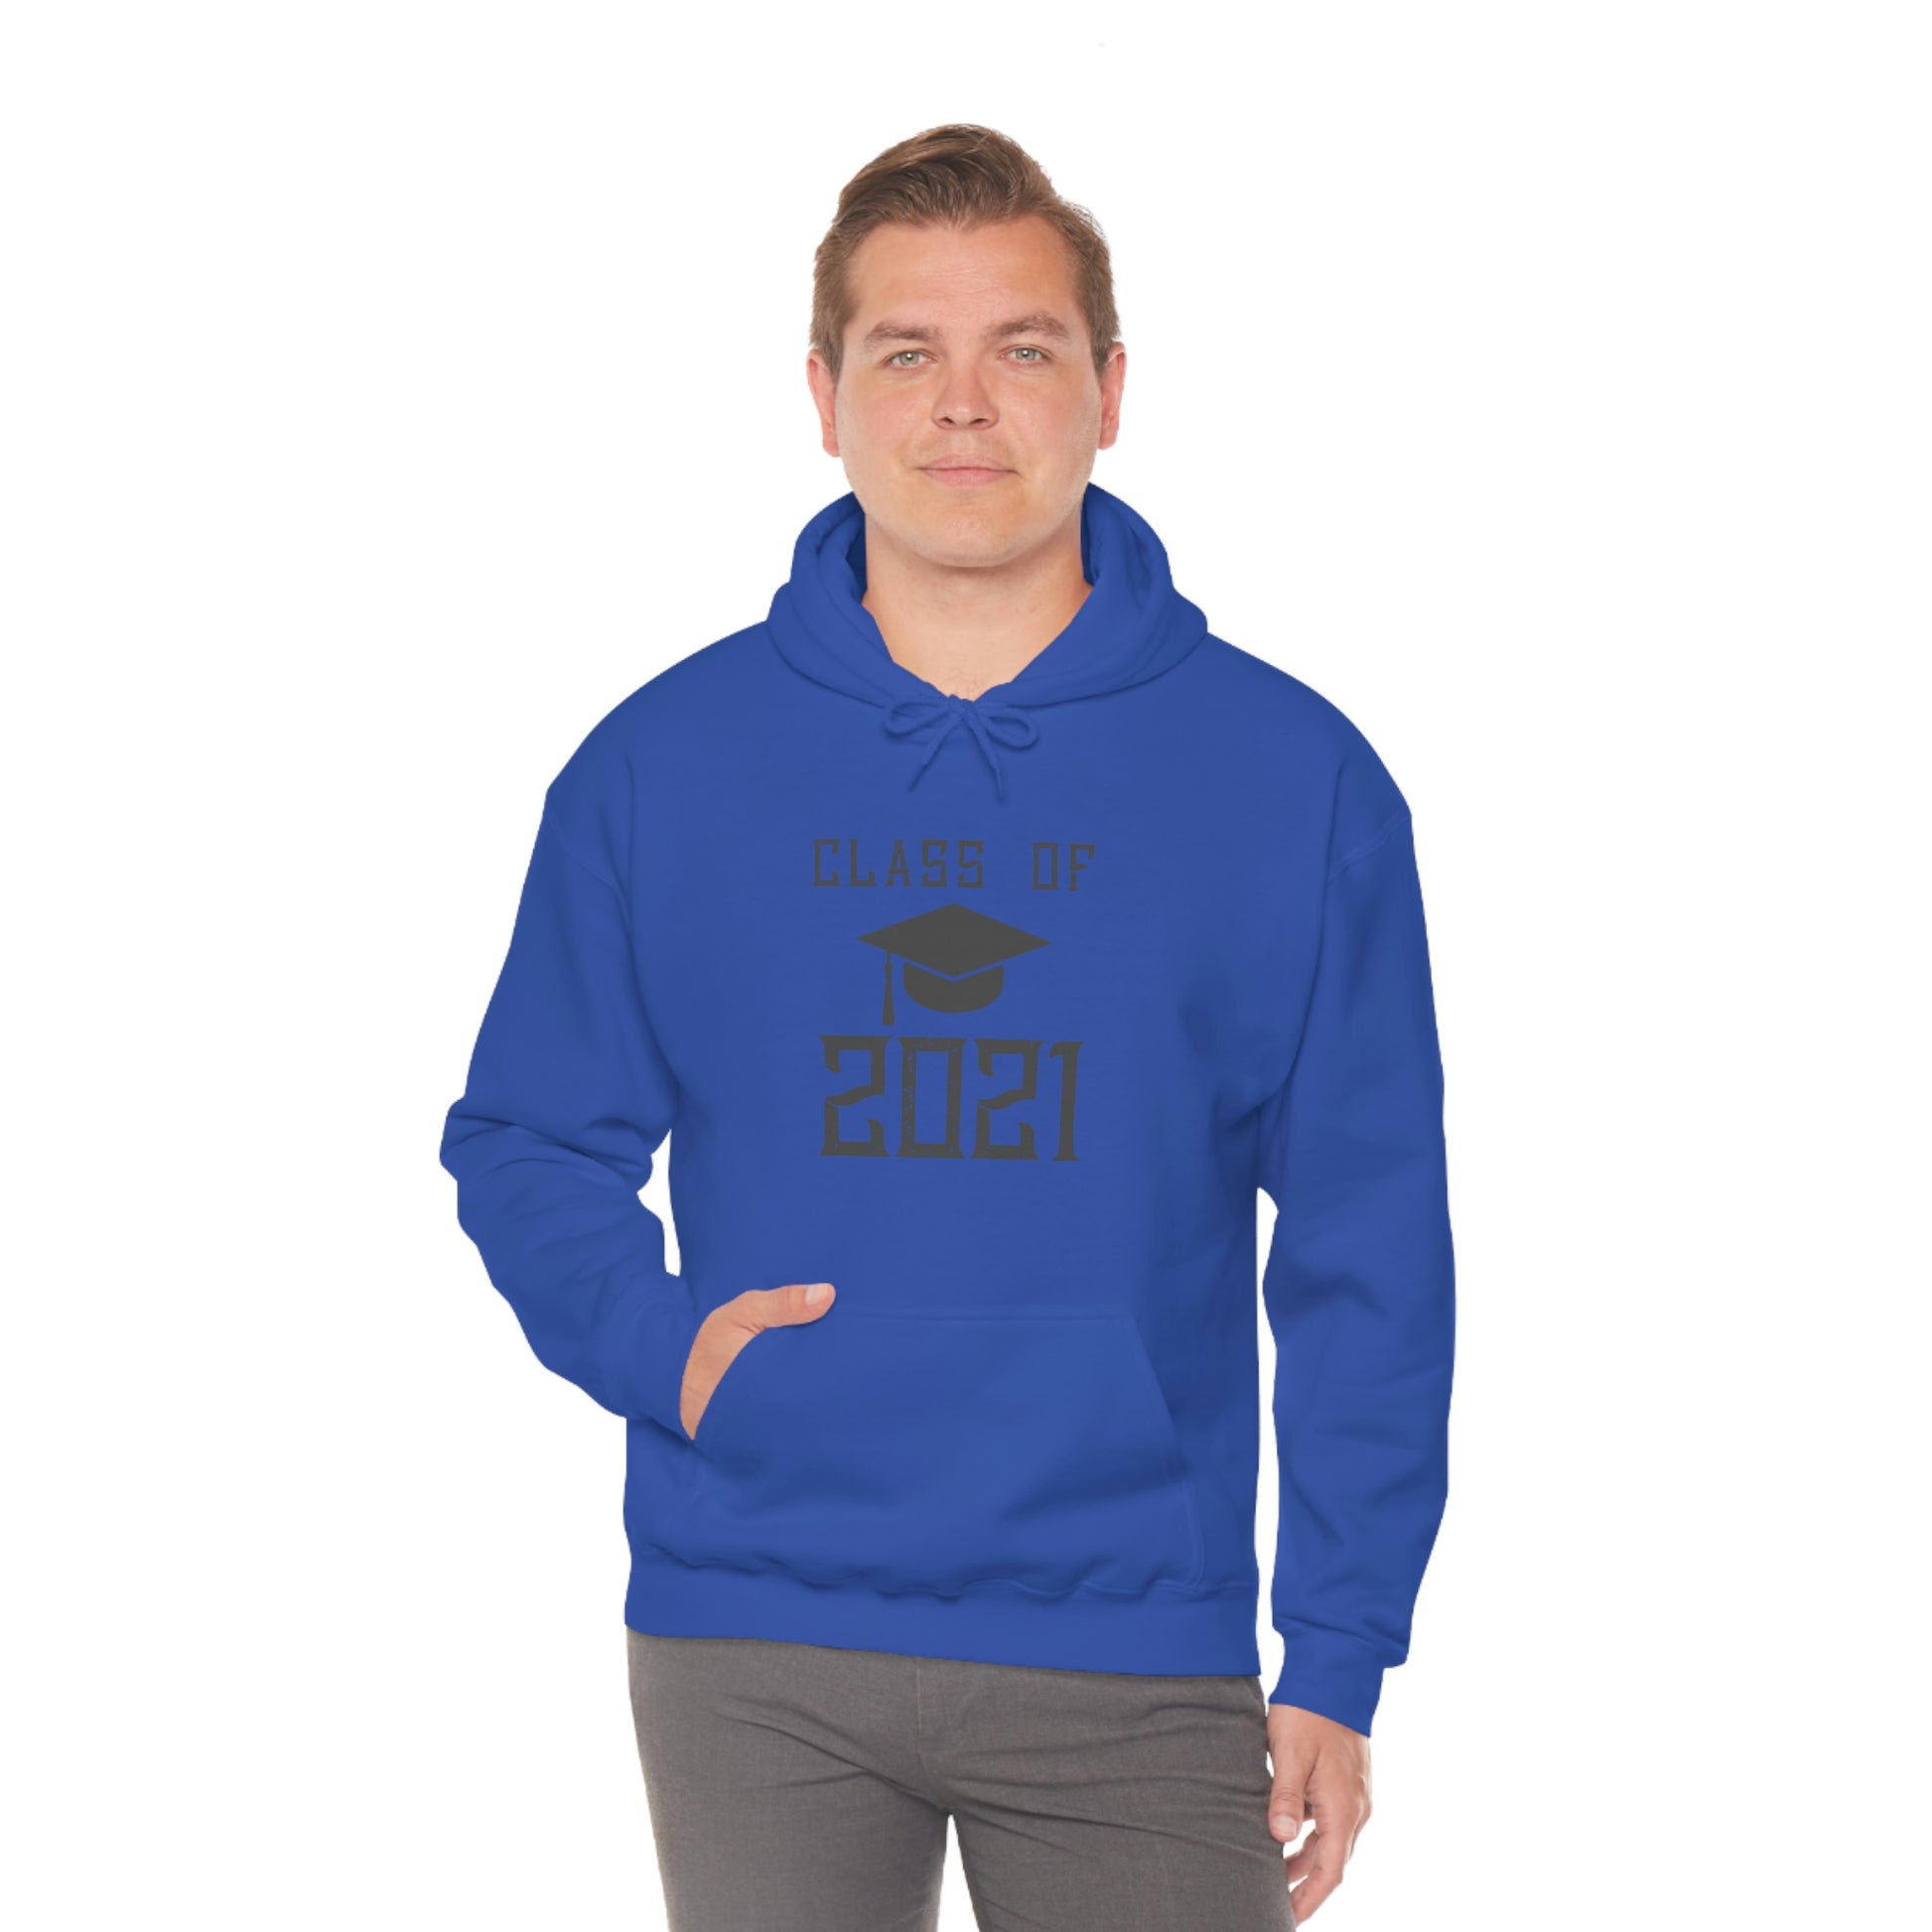 "Class Of 2021" hoodie - Weave Got Gifts - Unique Gifts You Won’t Find Anywhere Else!